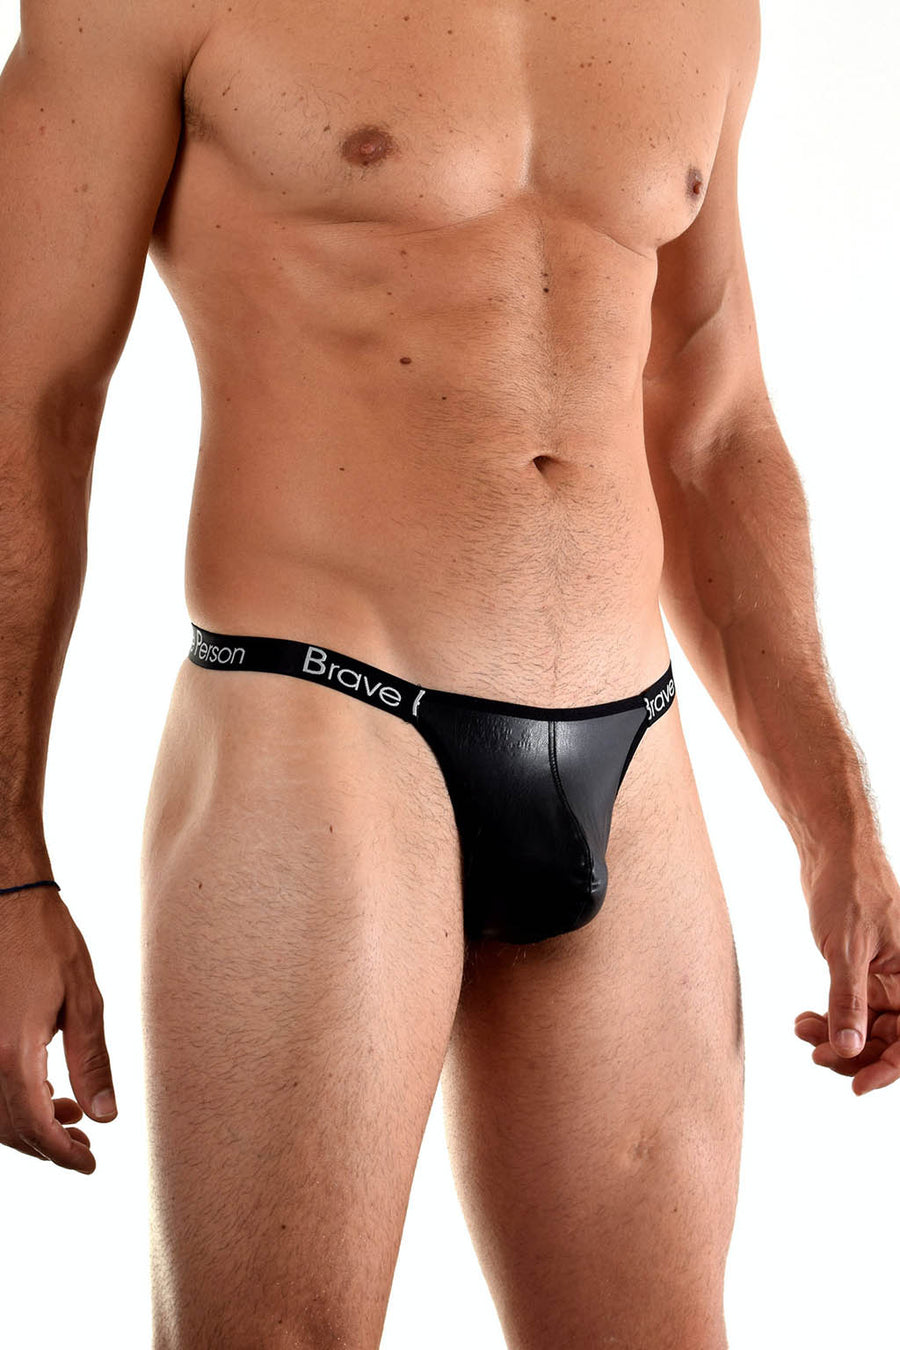 Brave Person Mens Faux Leather G-String Underwear